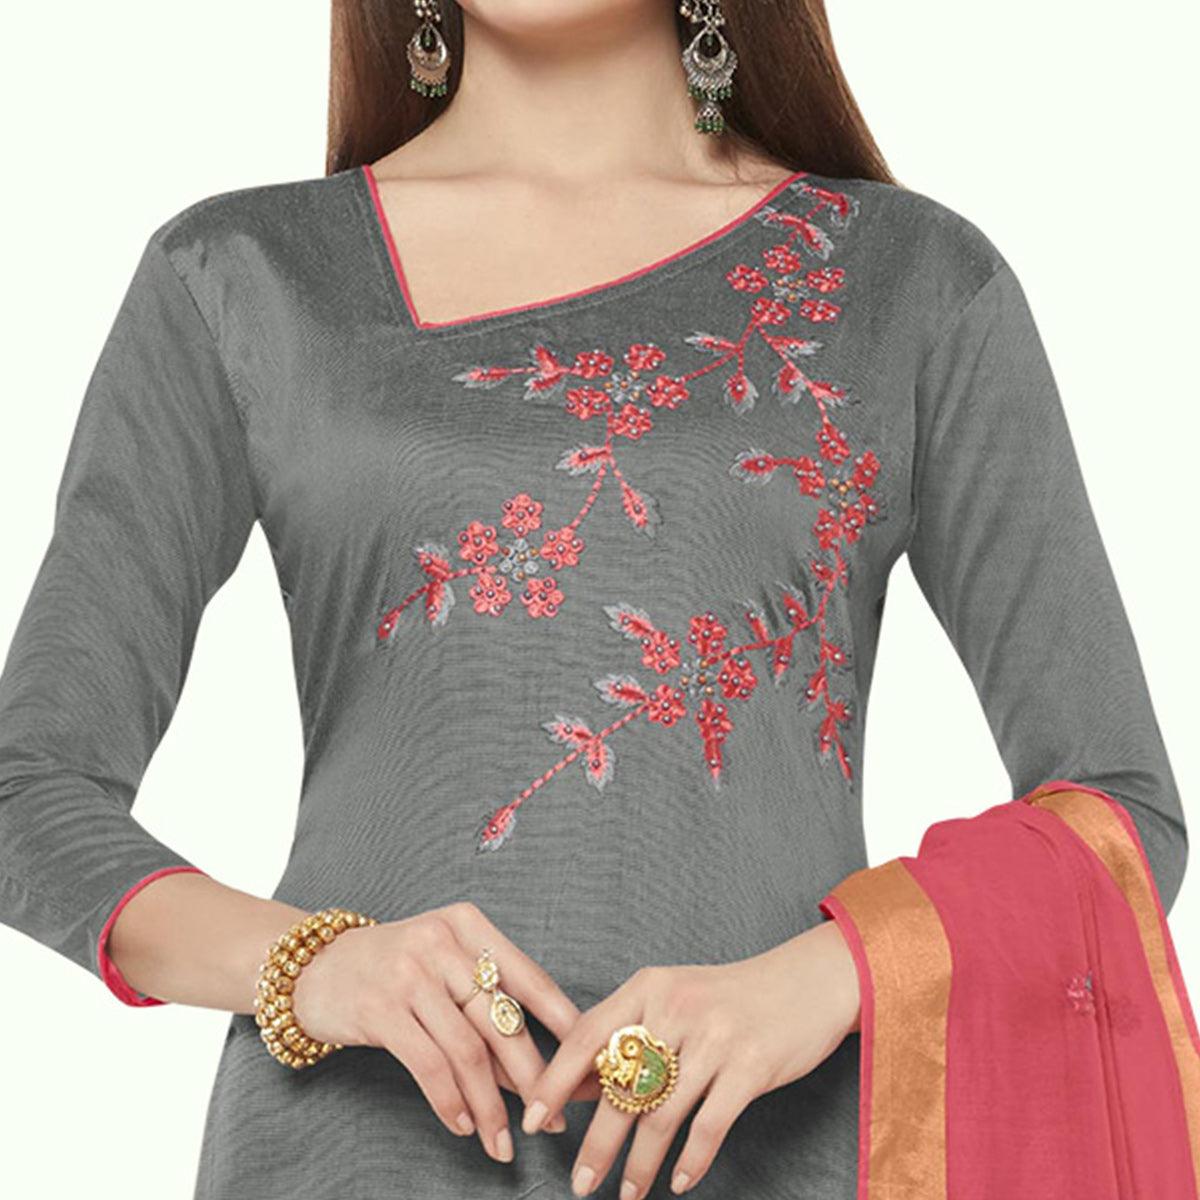 Magnetic Grey Colored Casual Wear Embroidered Cotton Dress Material - Peachmode